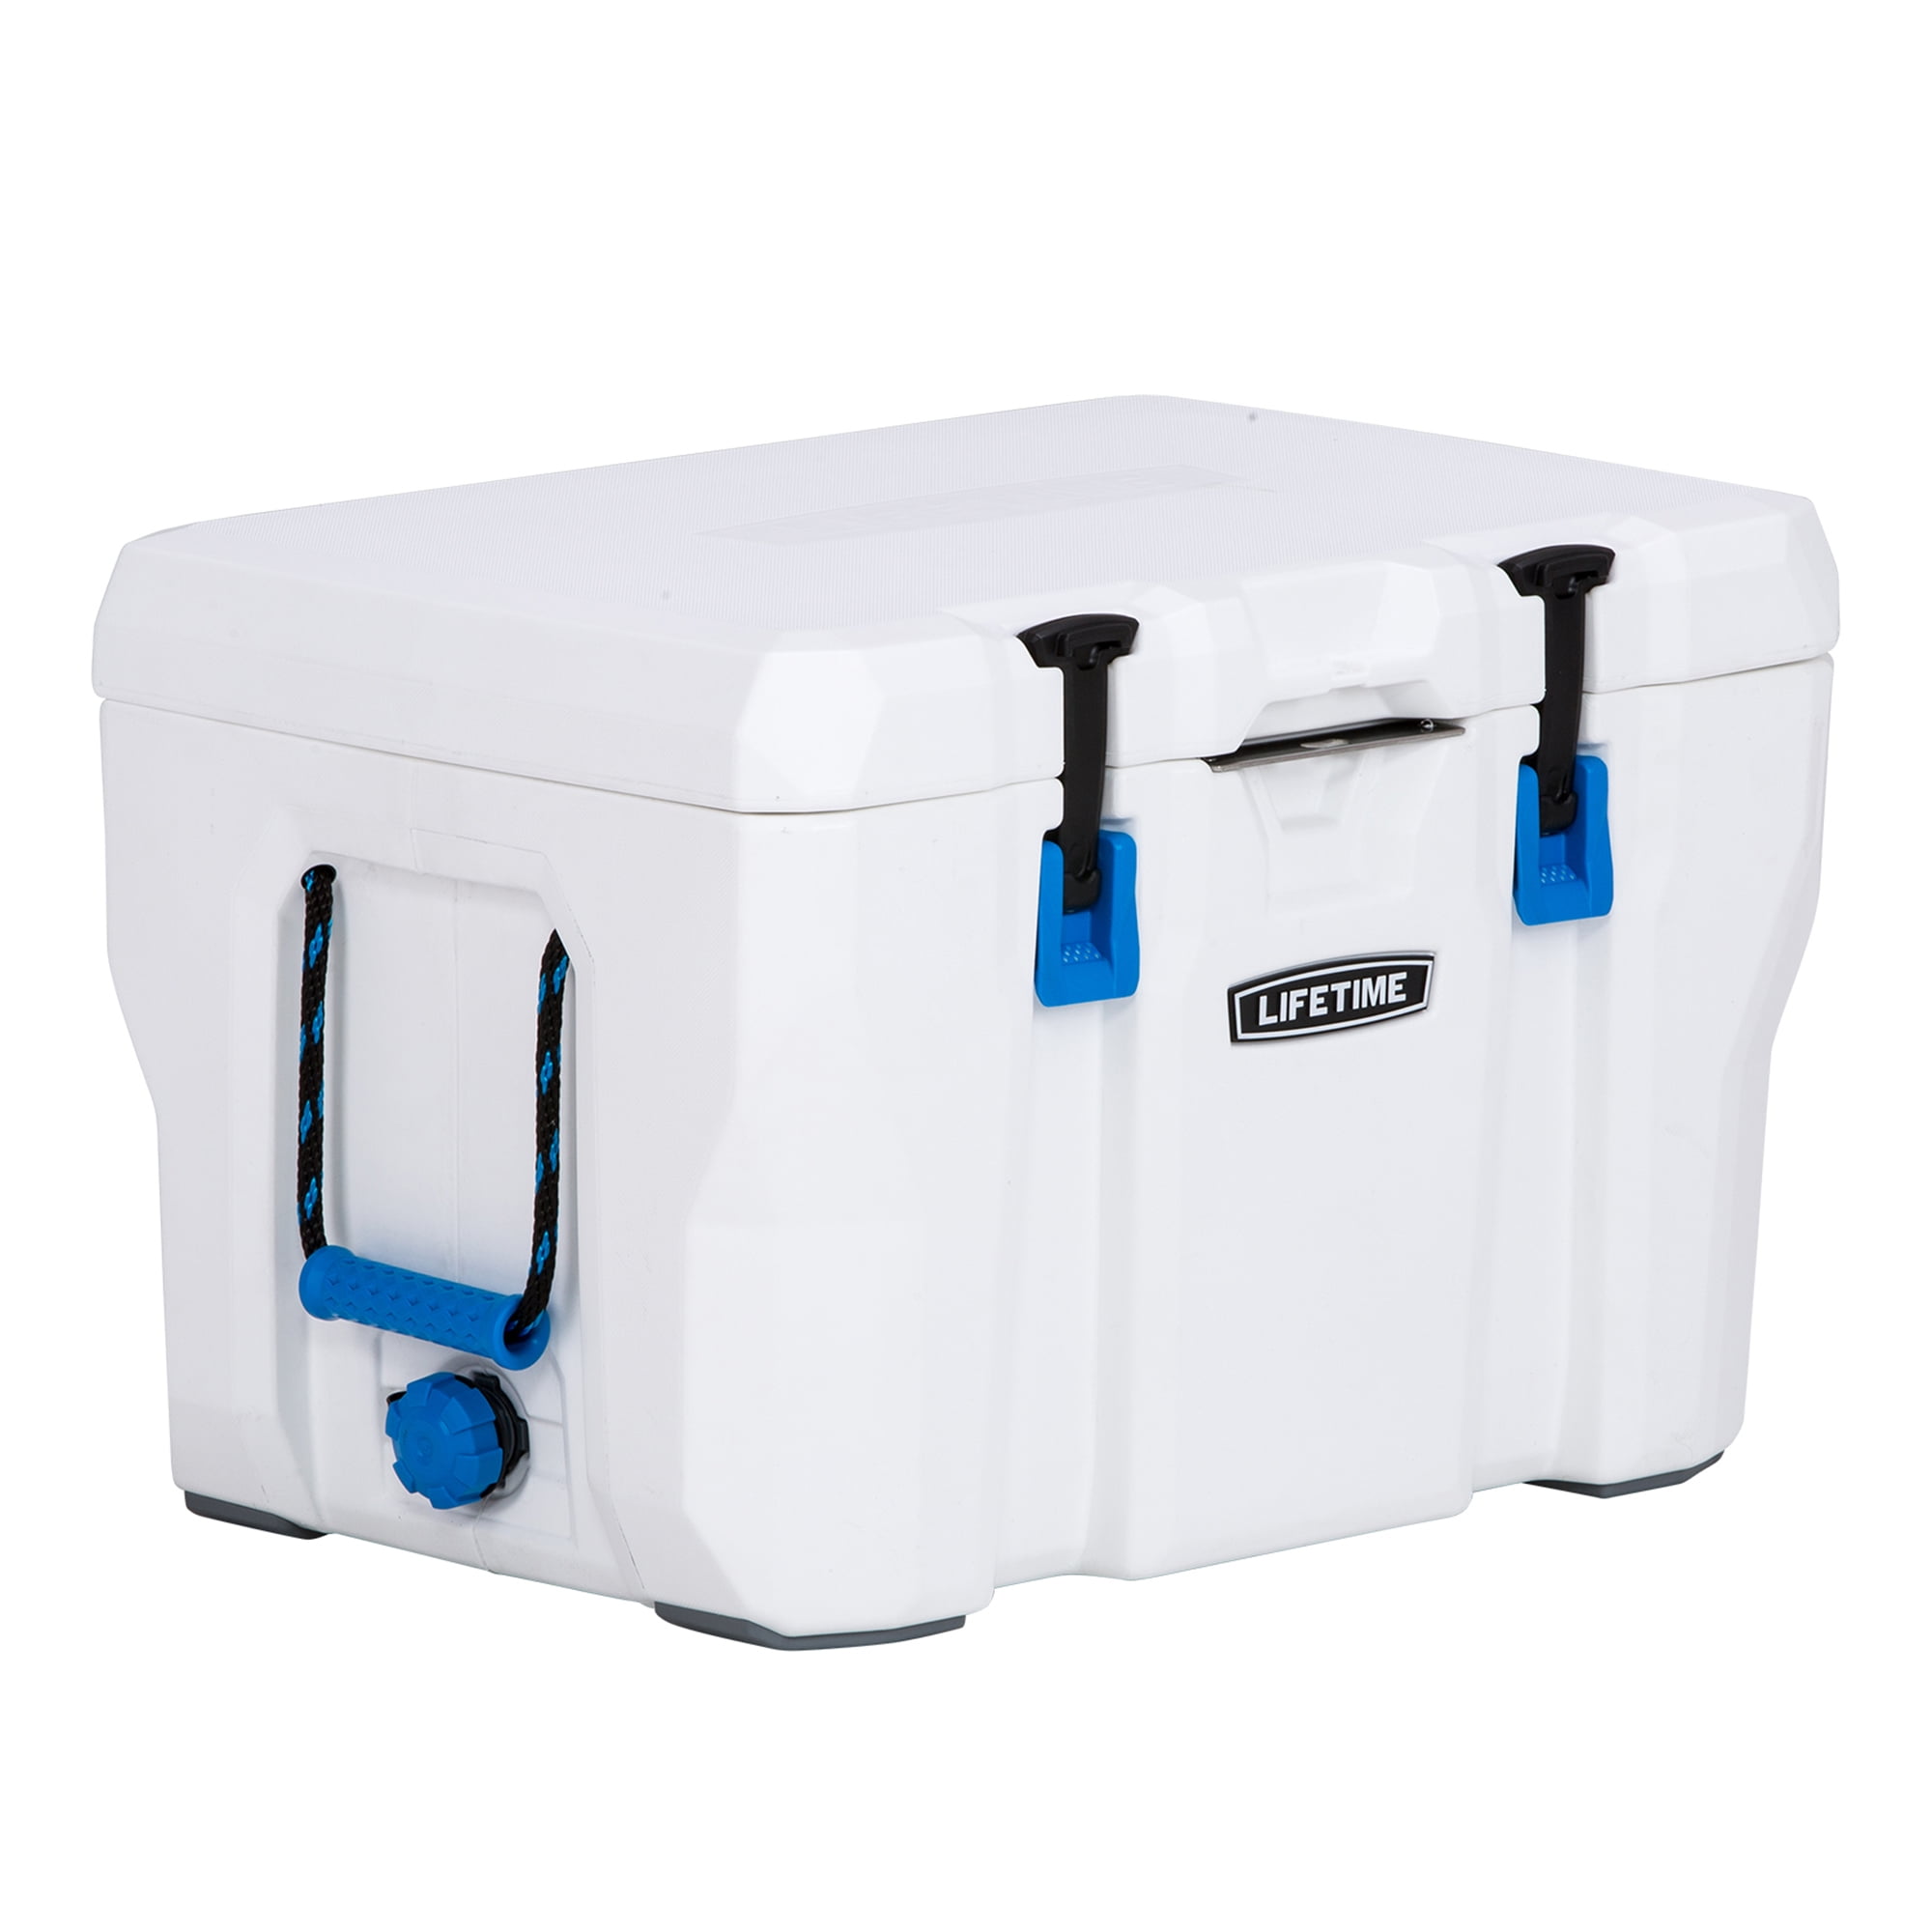 Lifetime 55Qt High Performance Insulated Ice Chest Cooler Hose Spout HEAVYDUTY 